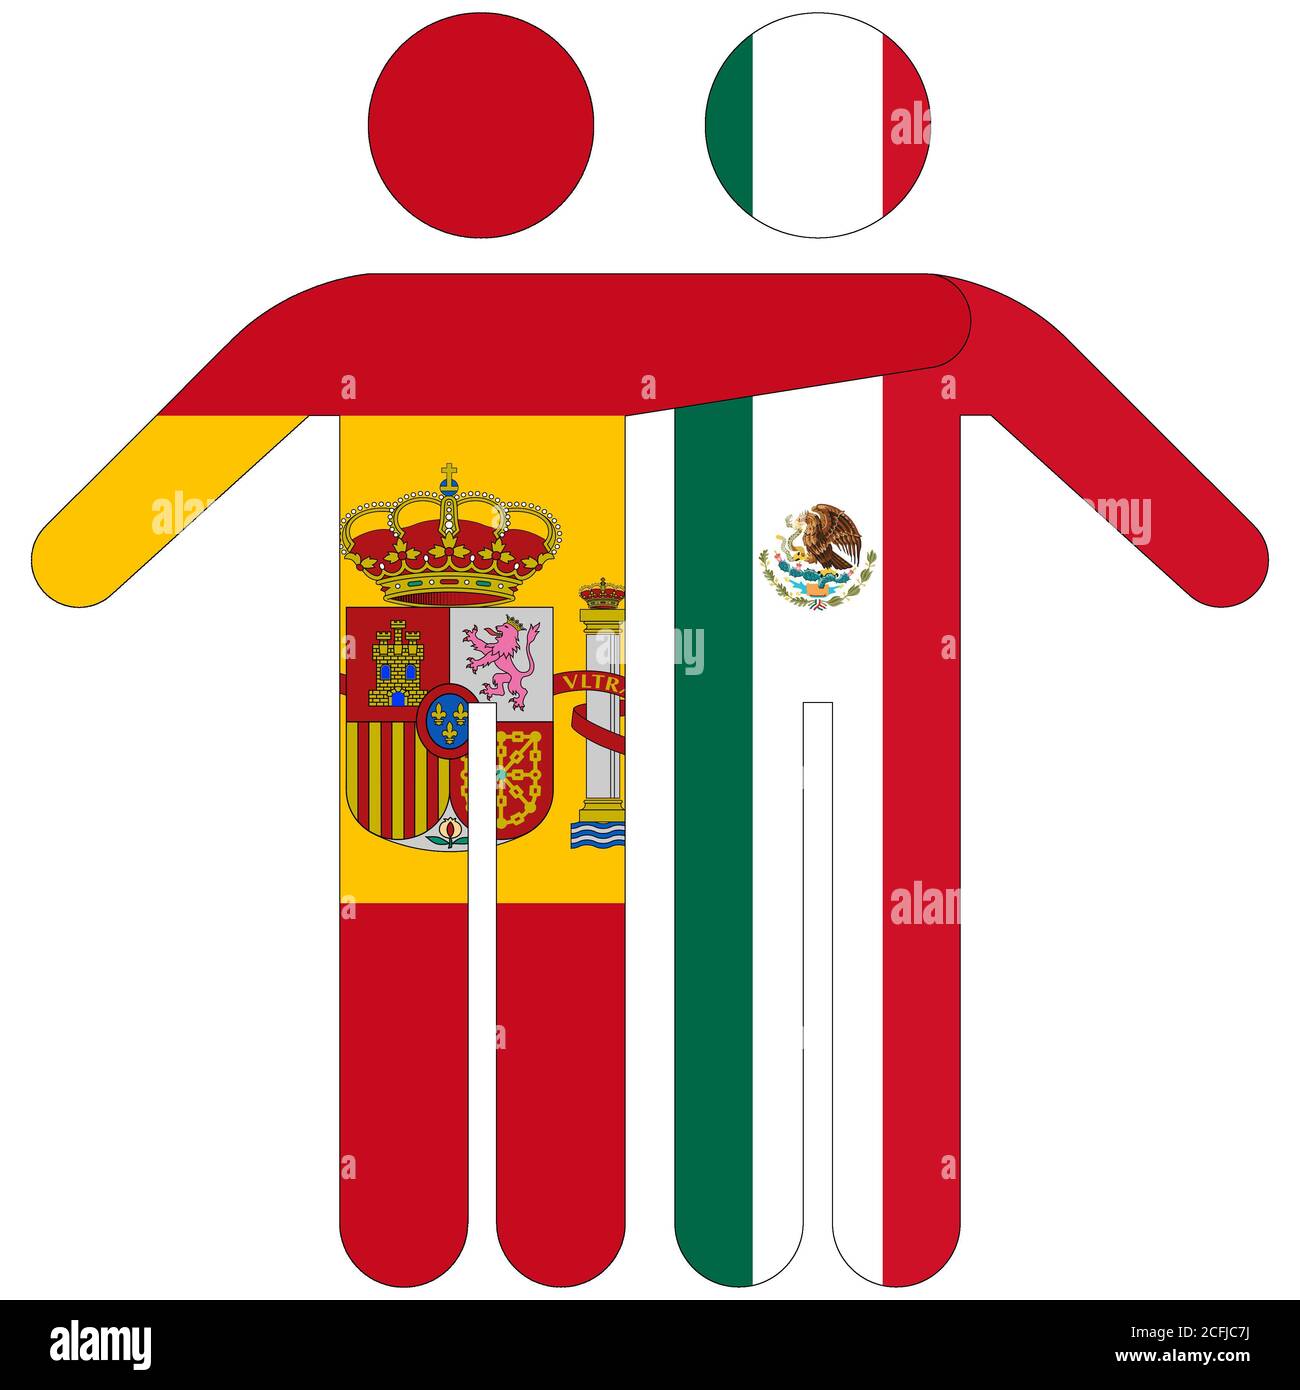 Spain - Mexico / friendship concept on white background Stock Photo